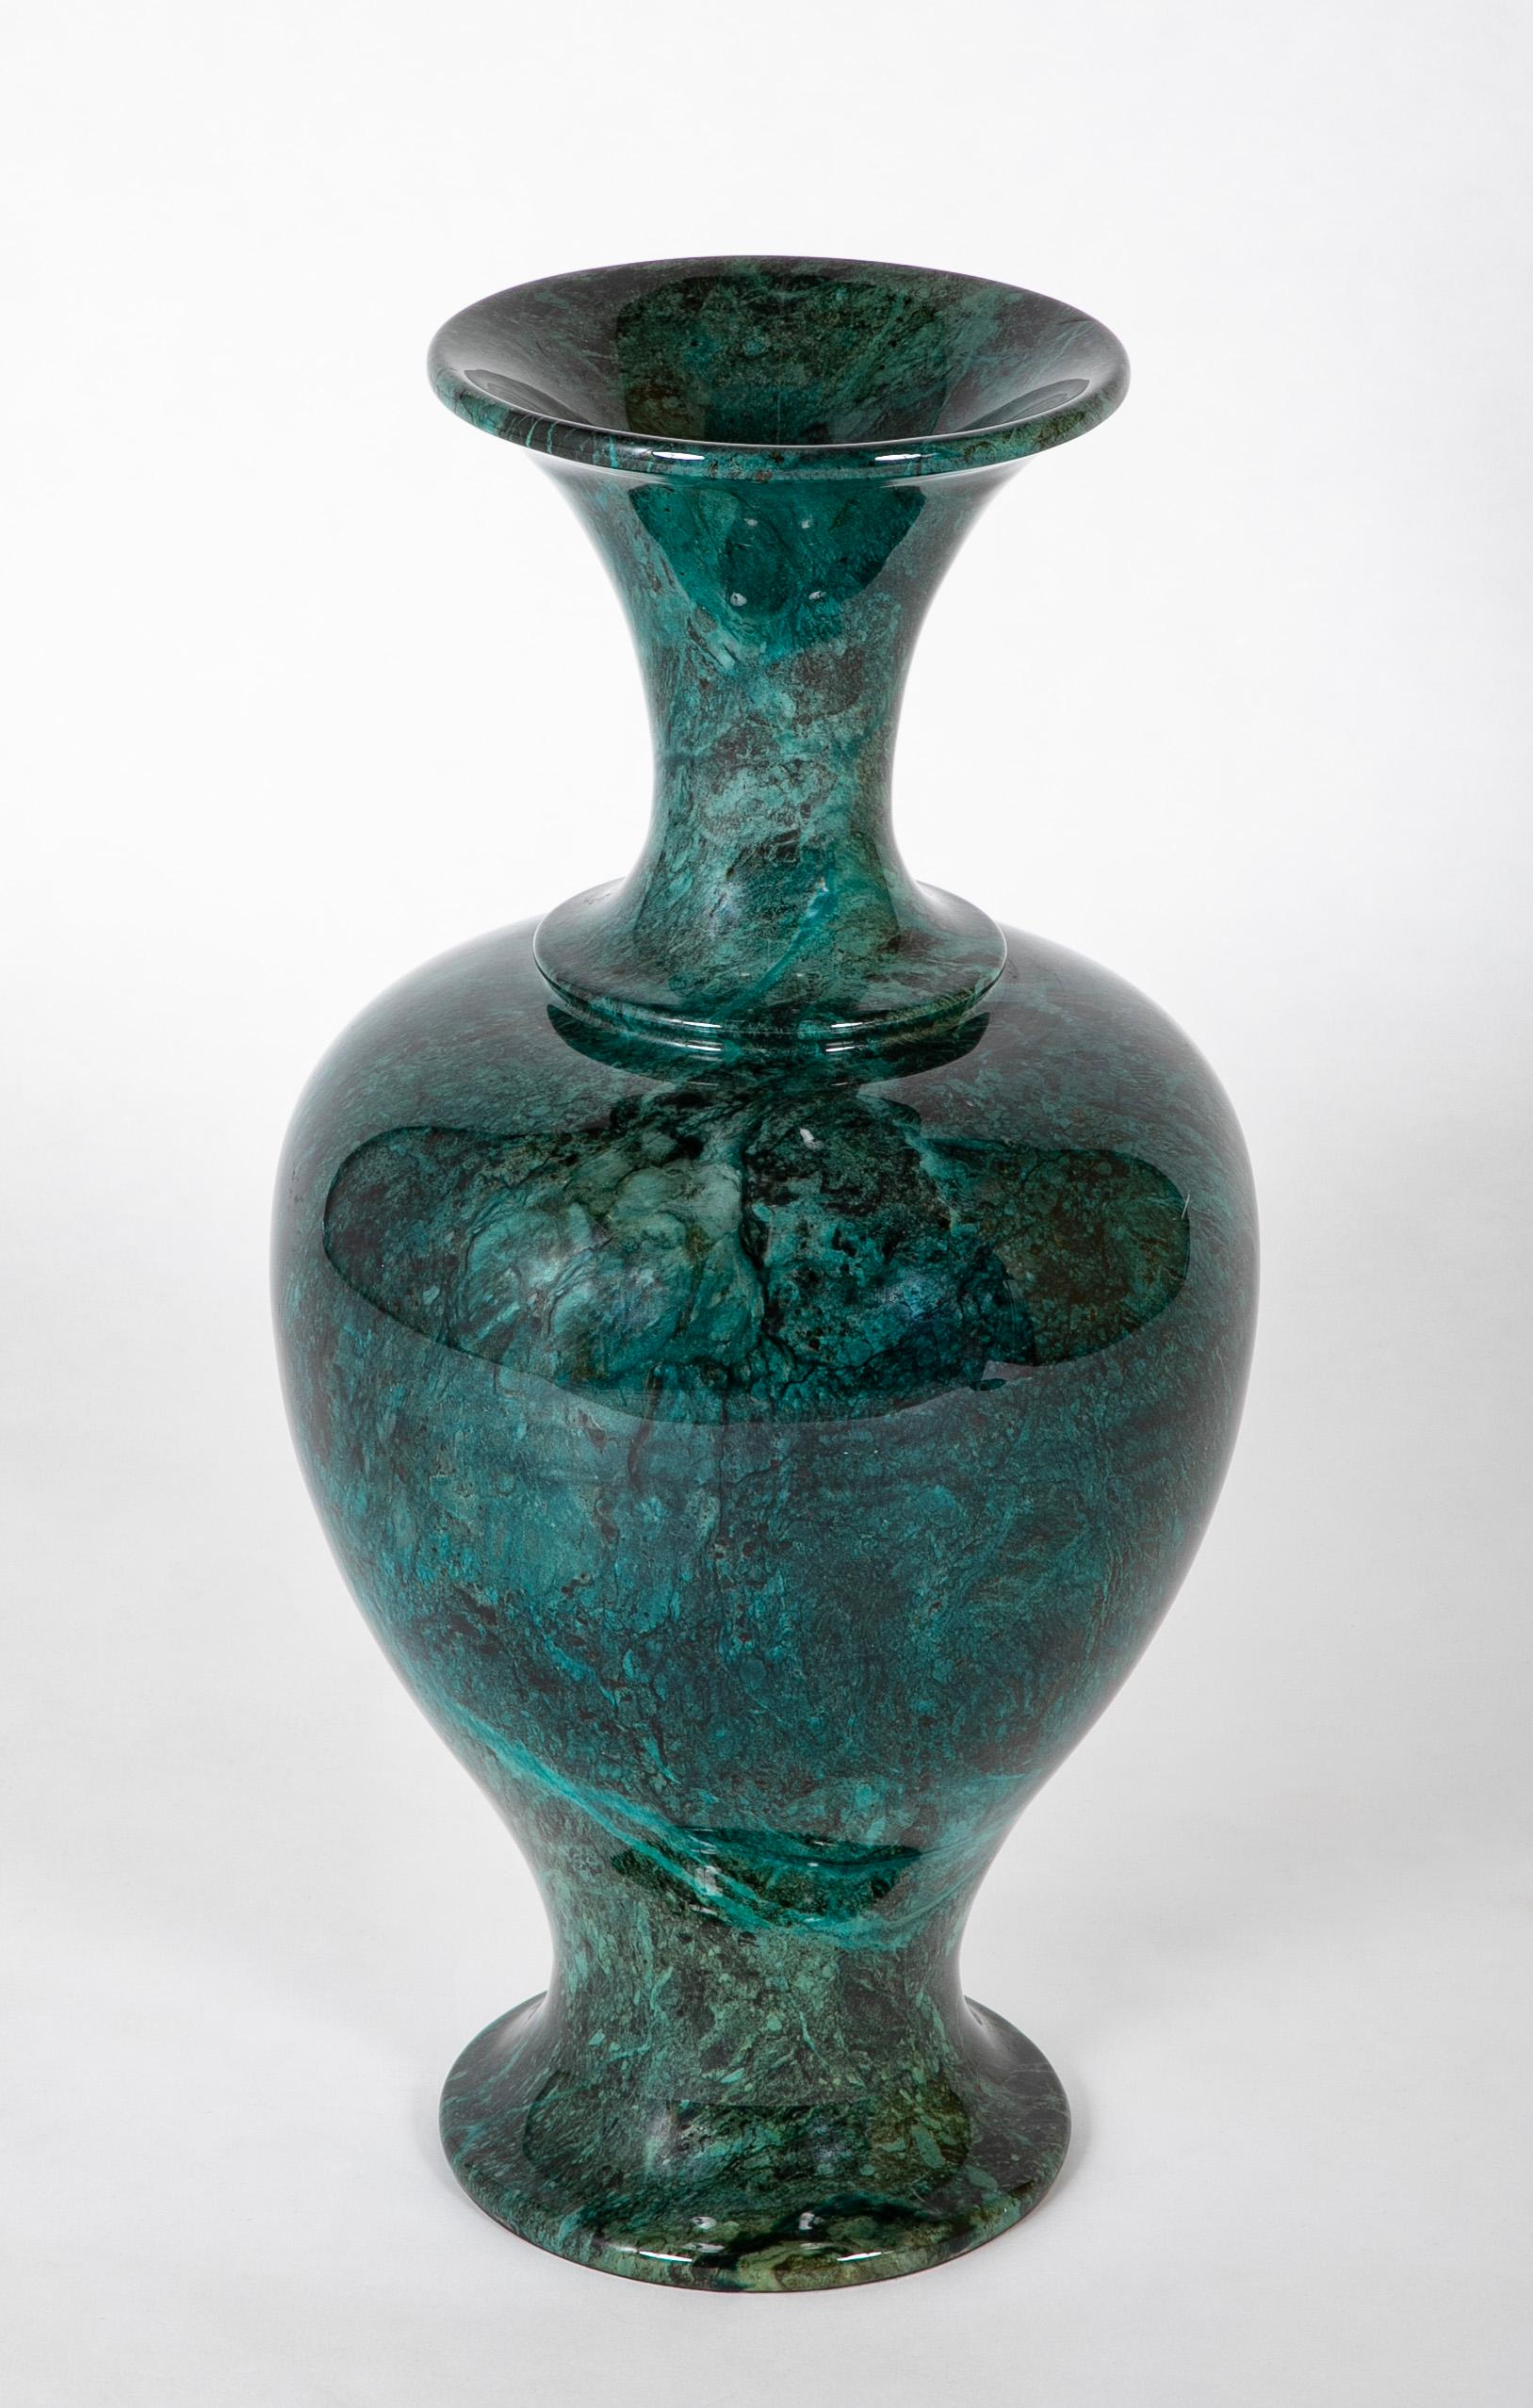 Large scale faux marble vase form urn. This impressive piece is over 2 feet tall, (28 inches). It will make quite and impact on an entry or center table. Made of a sturdy composite in a beautiful faux marble green and black 'verdi antico' finish.